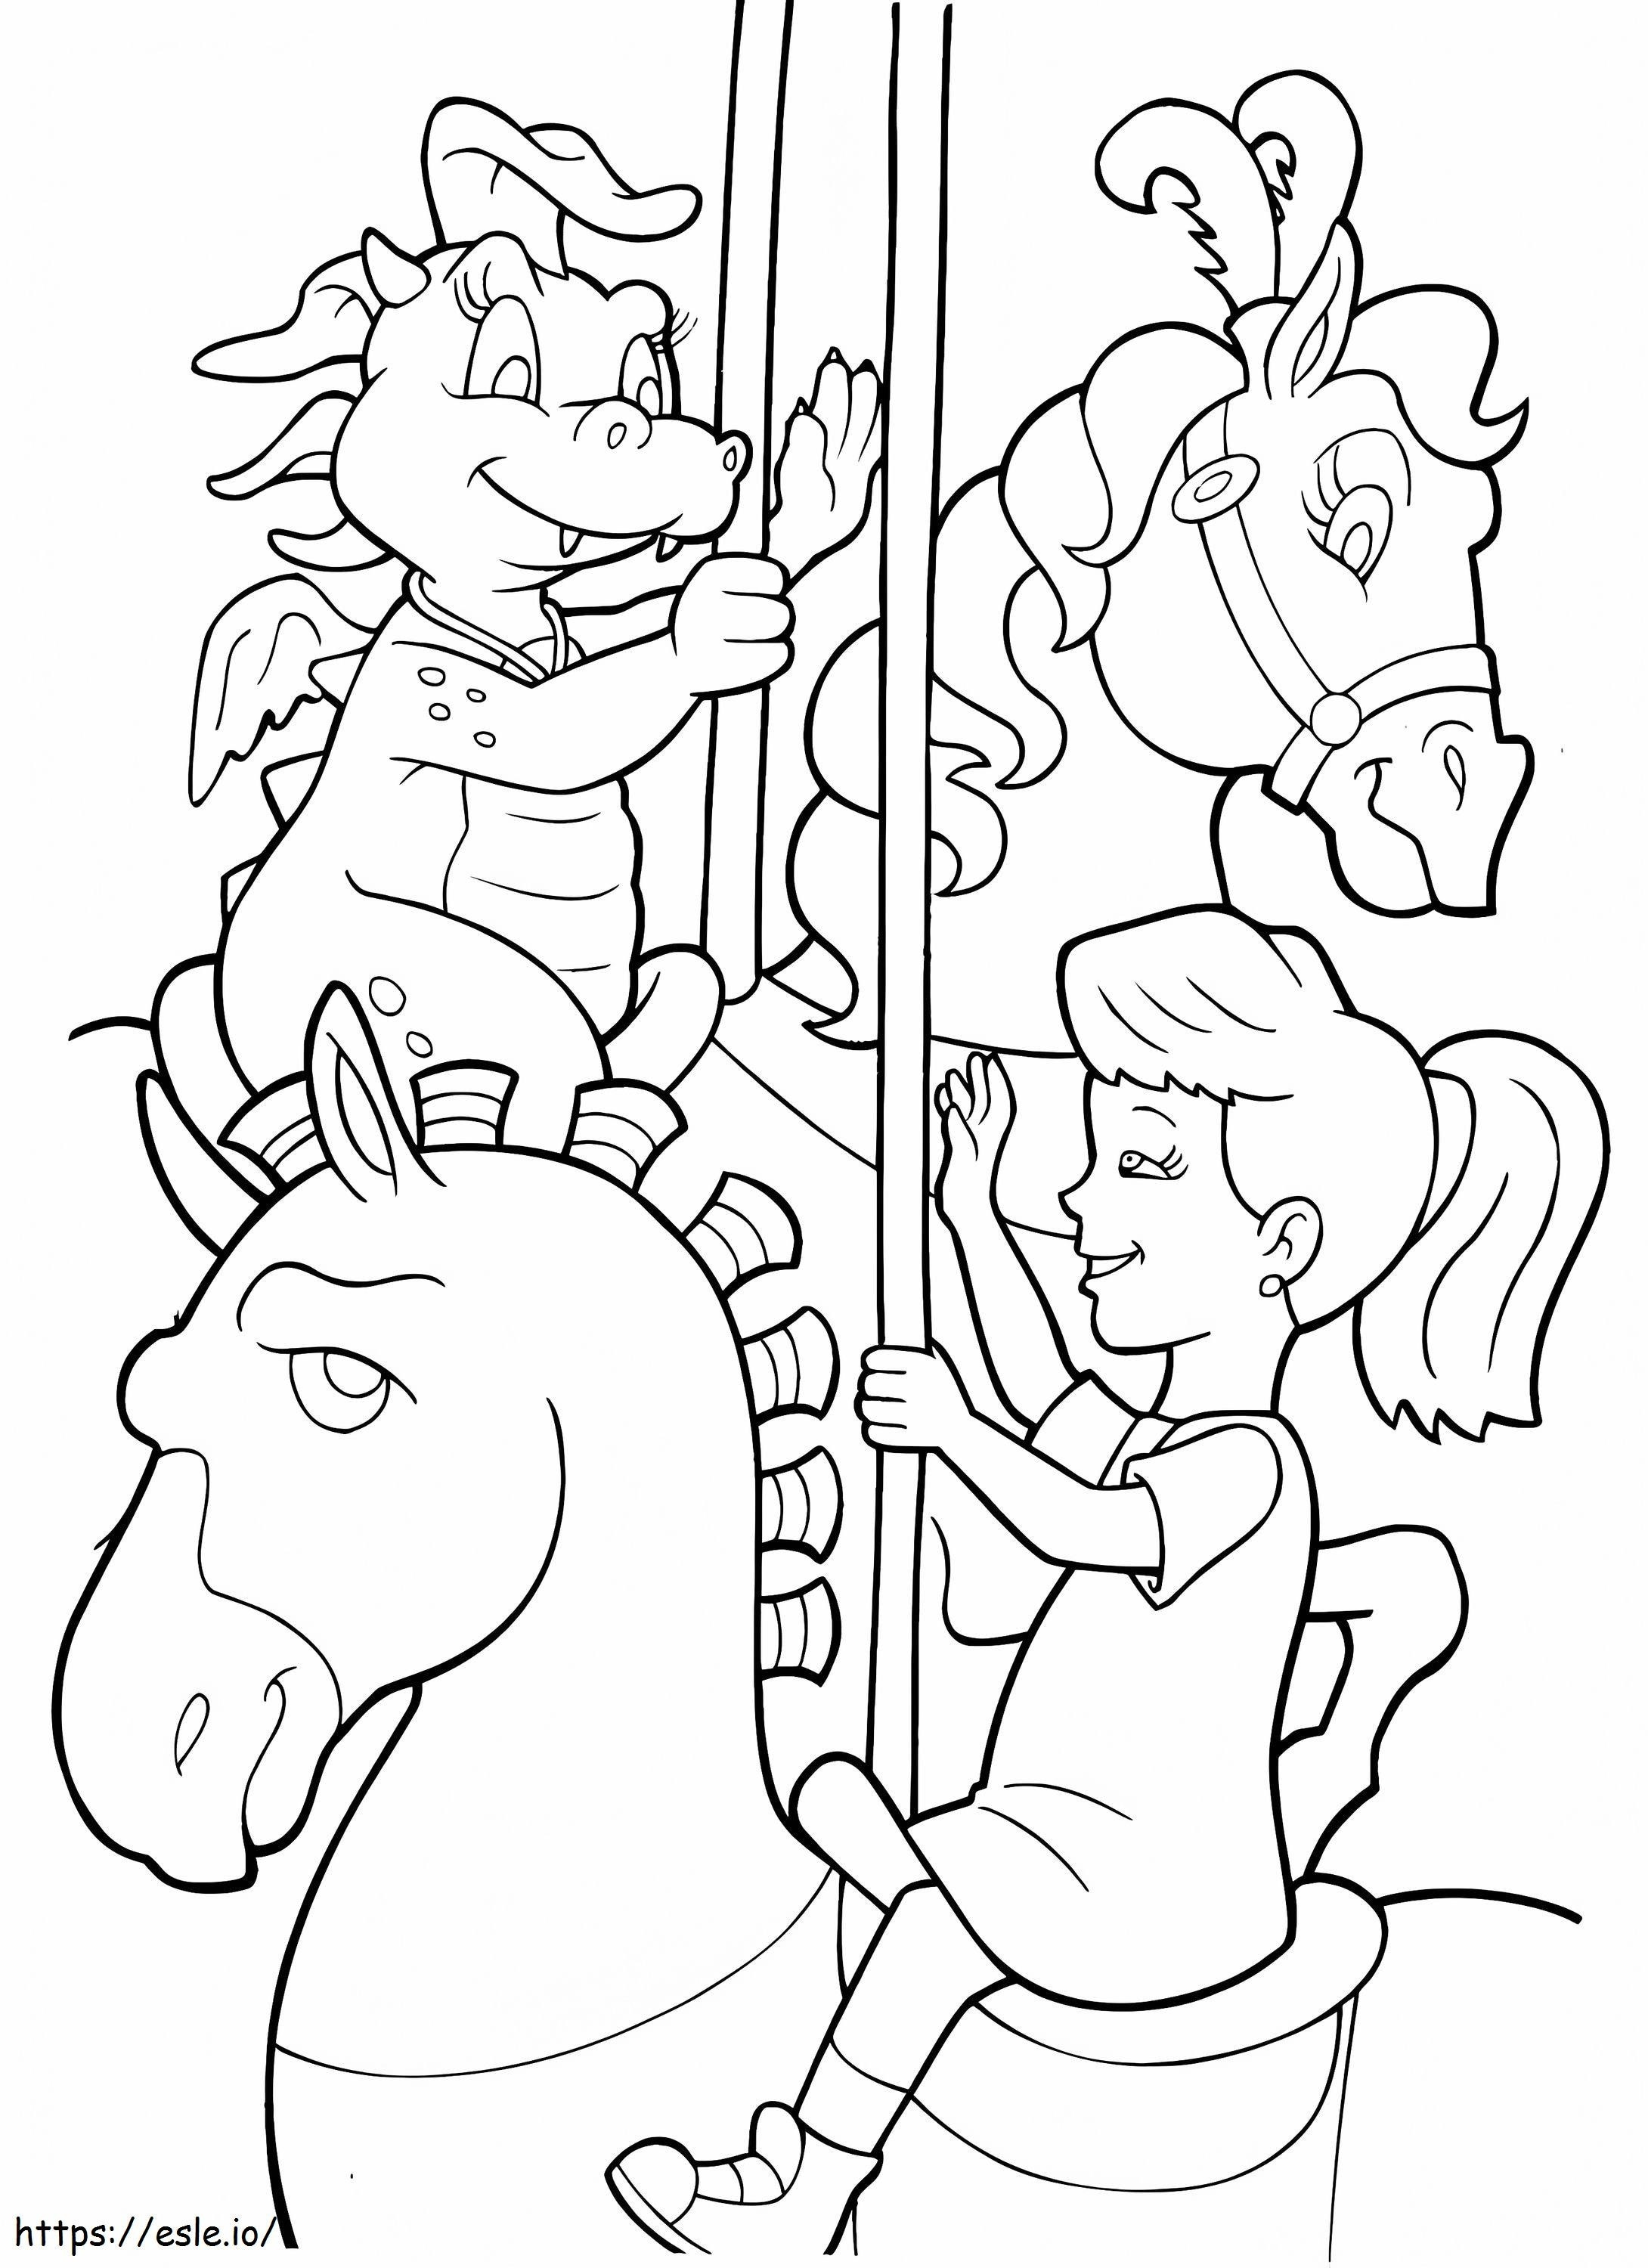 Emmy Dragon And Carousel coloring page